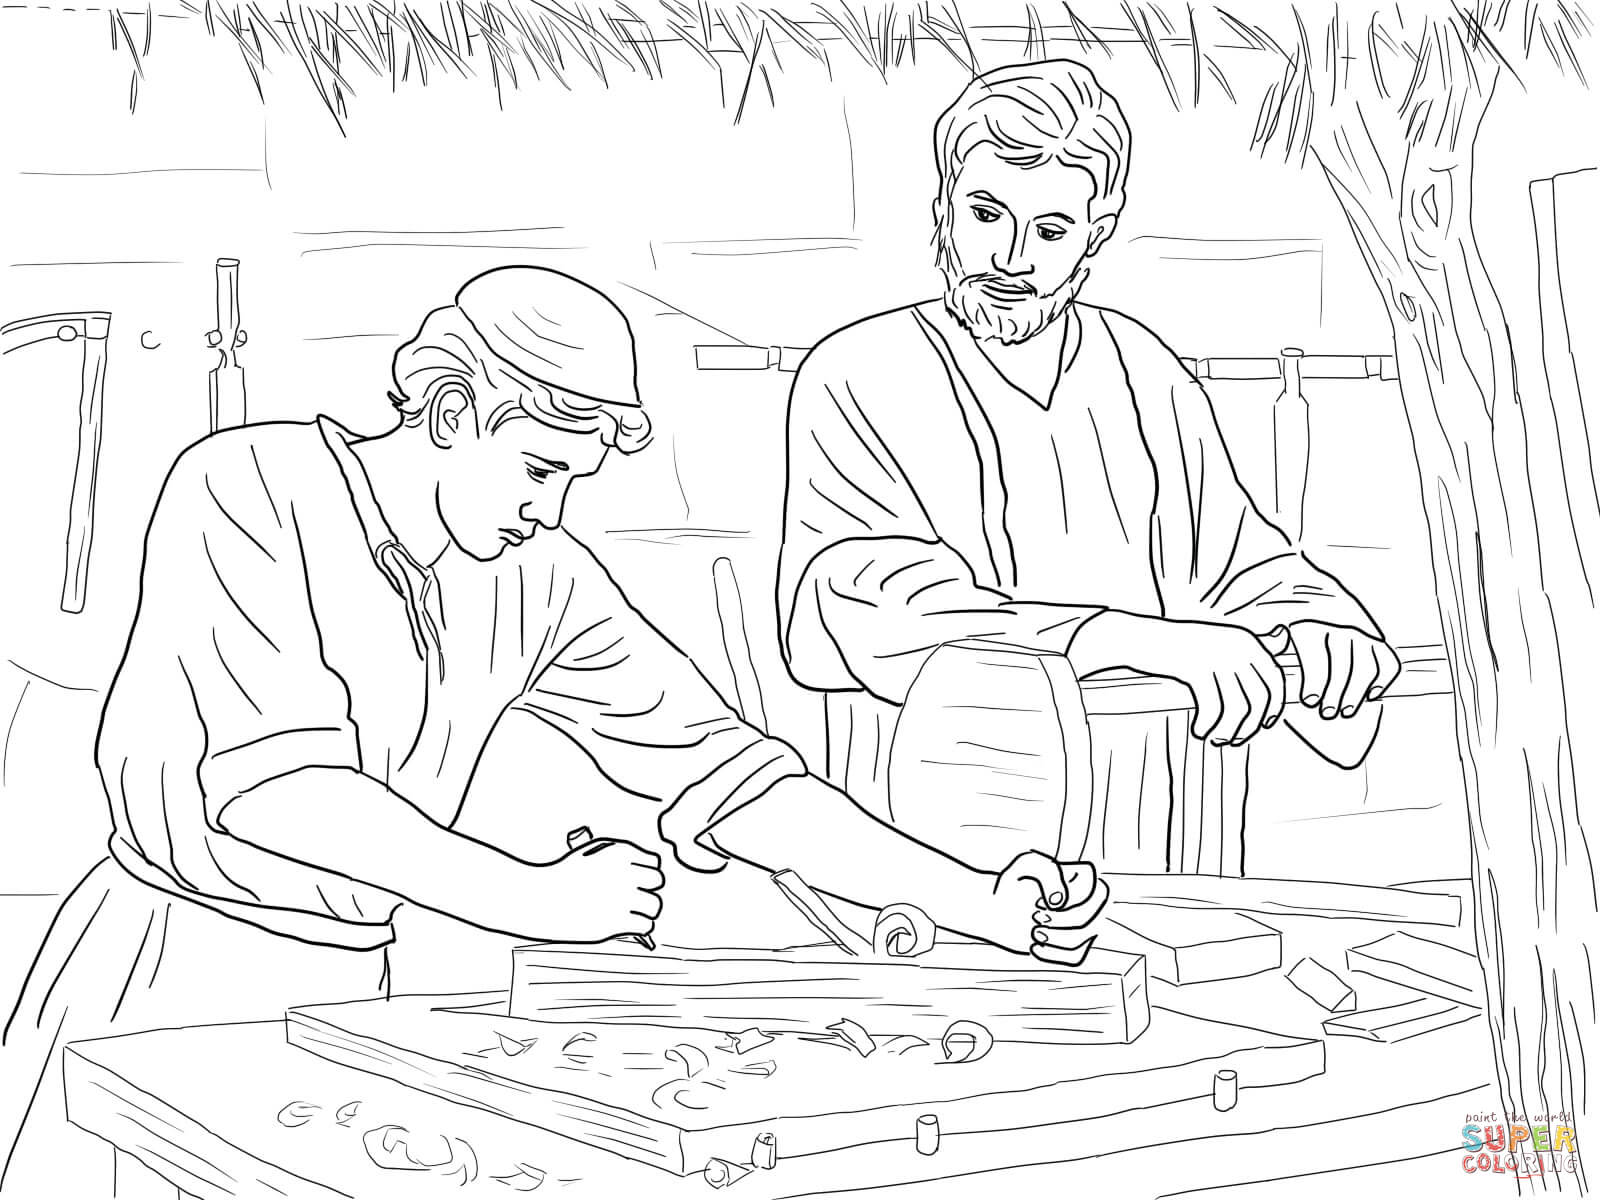 Jesus Raises Widows Son coloring page | Free Printable Coloring Pages